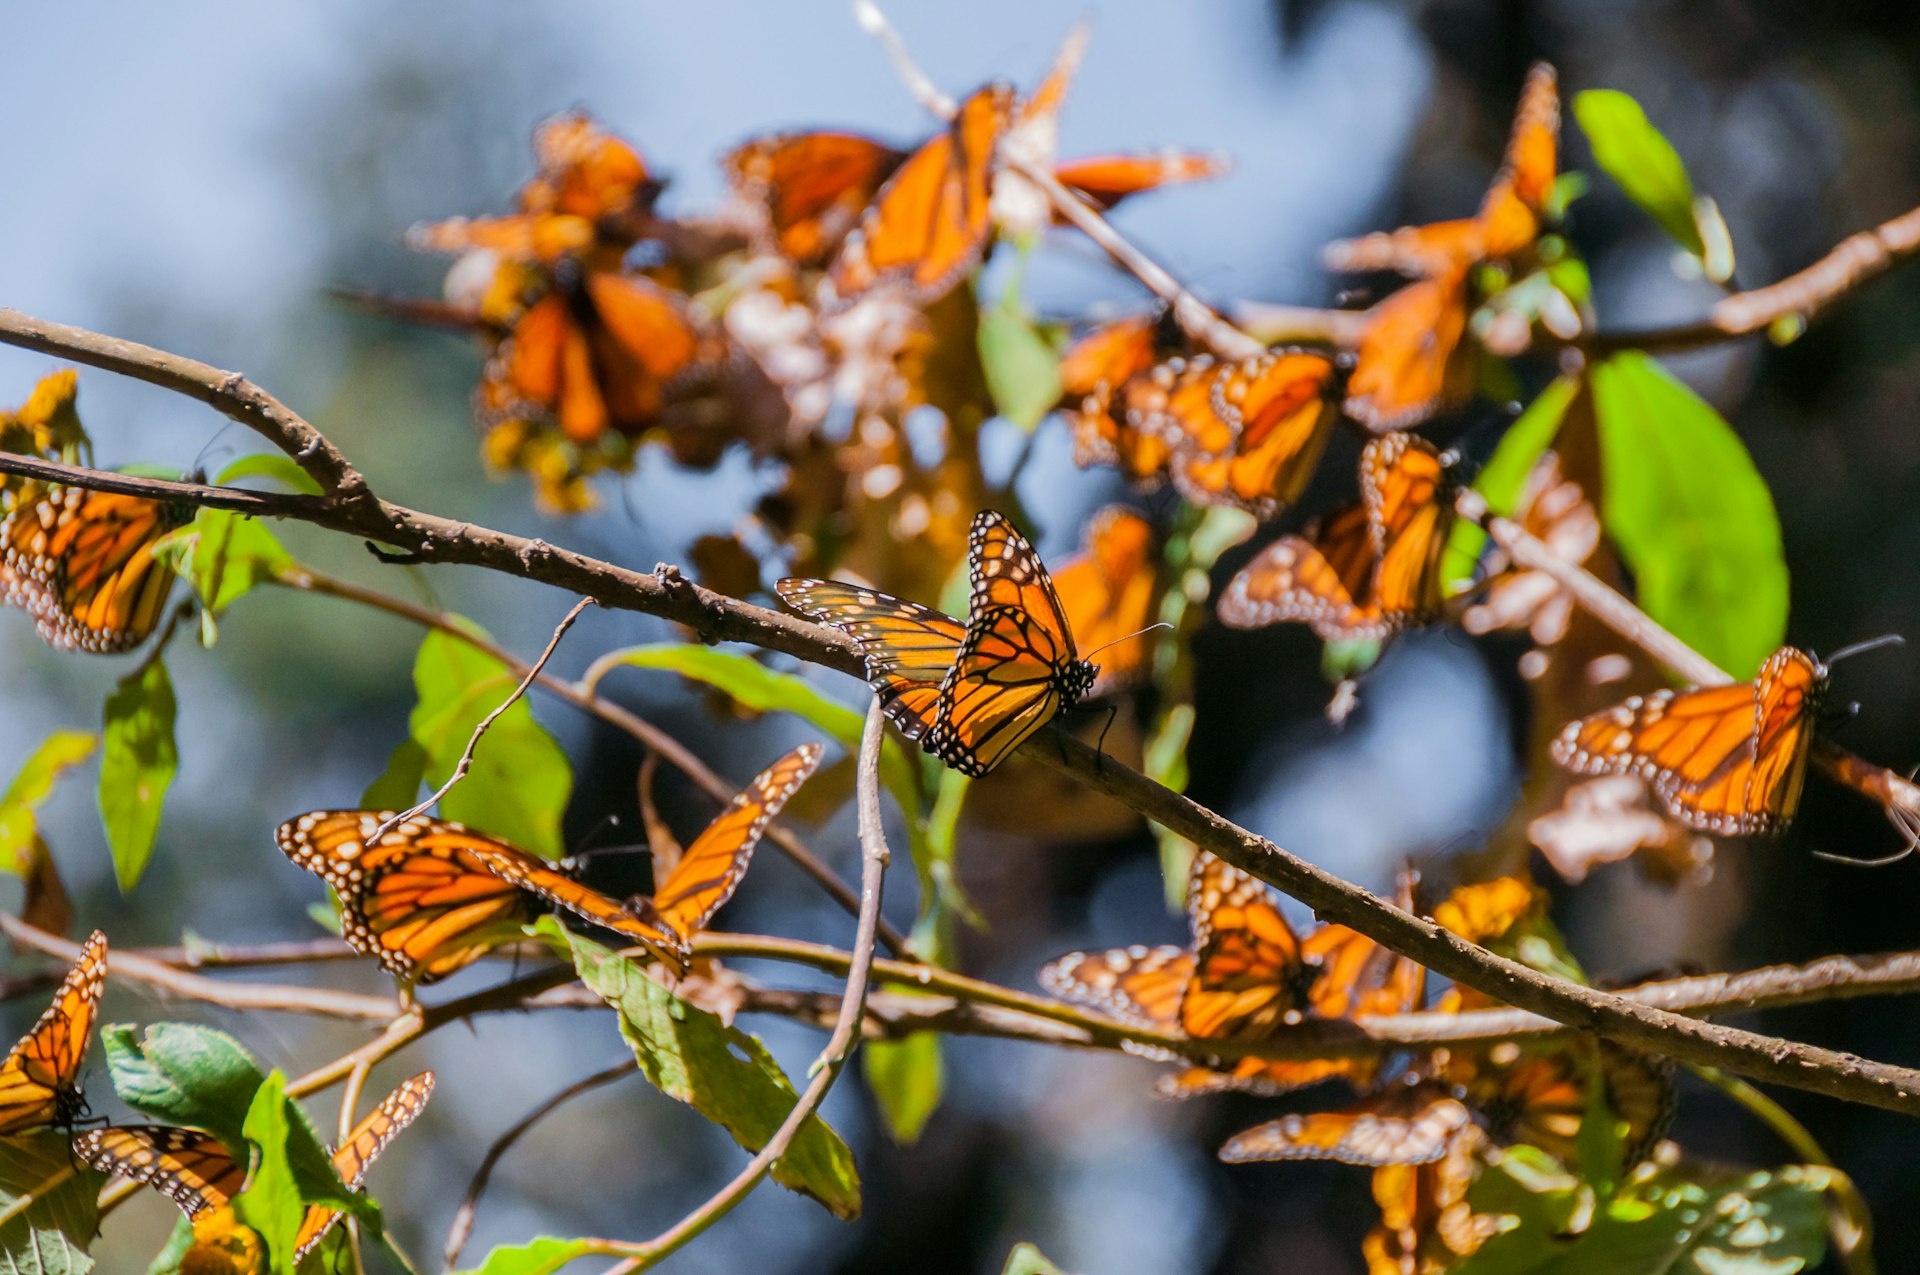 Monarch butterflies cover the branches of a tree in the Biosphere Reserve, Mexico